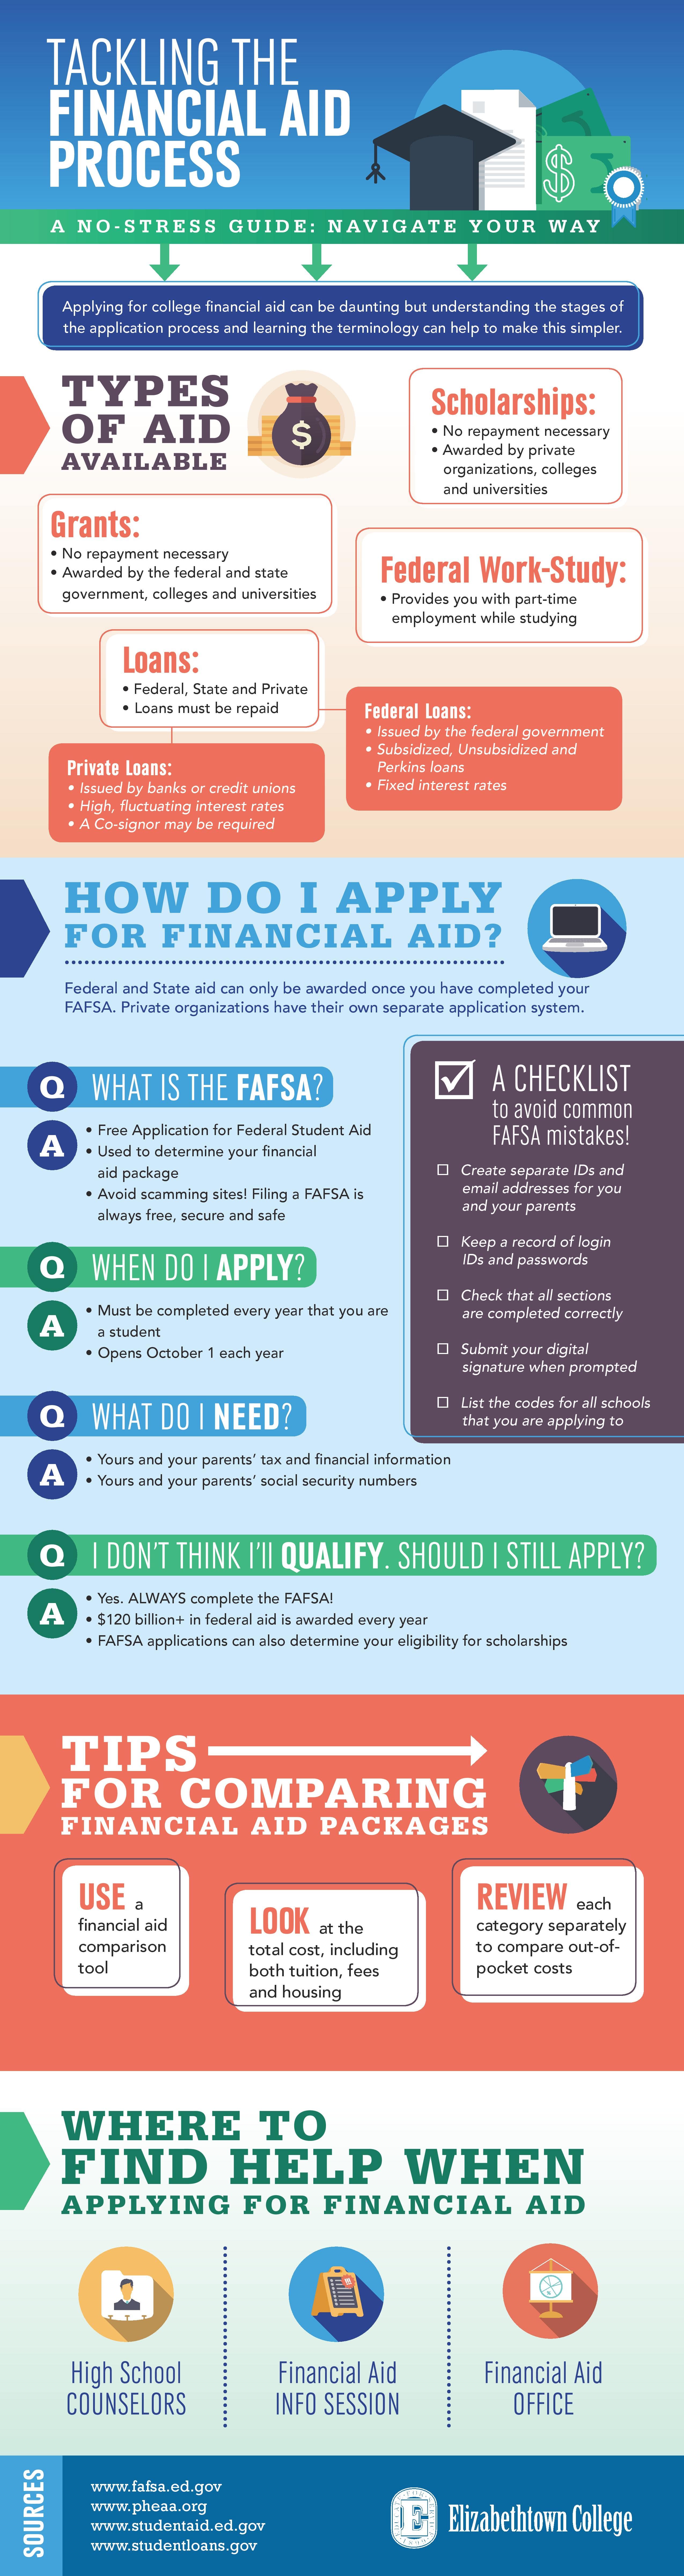 financial aid process and terminology infographic